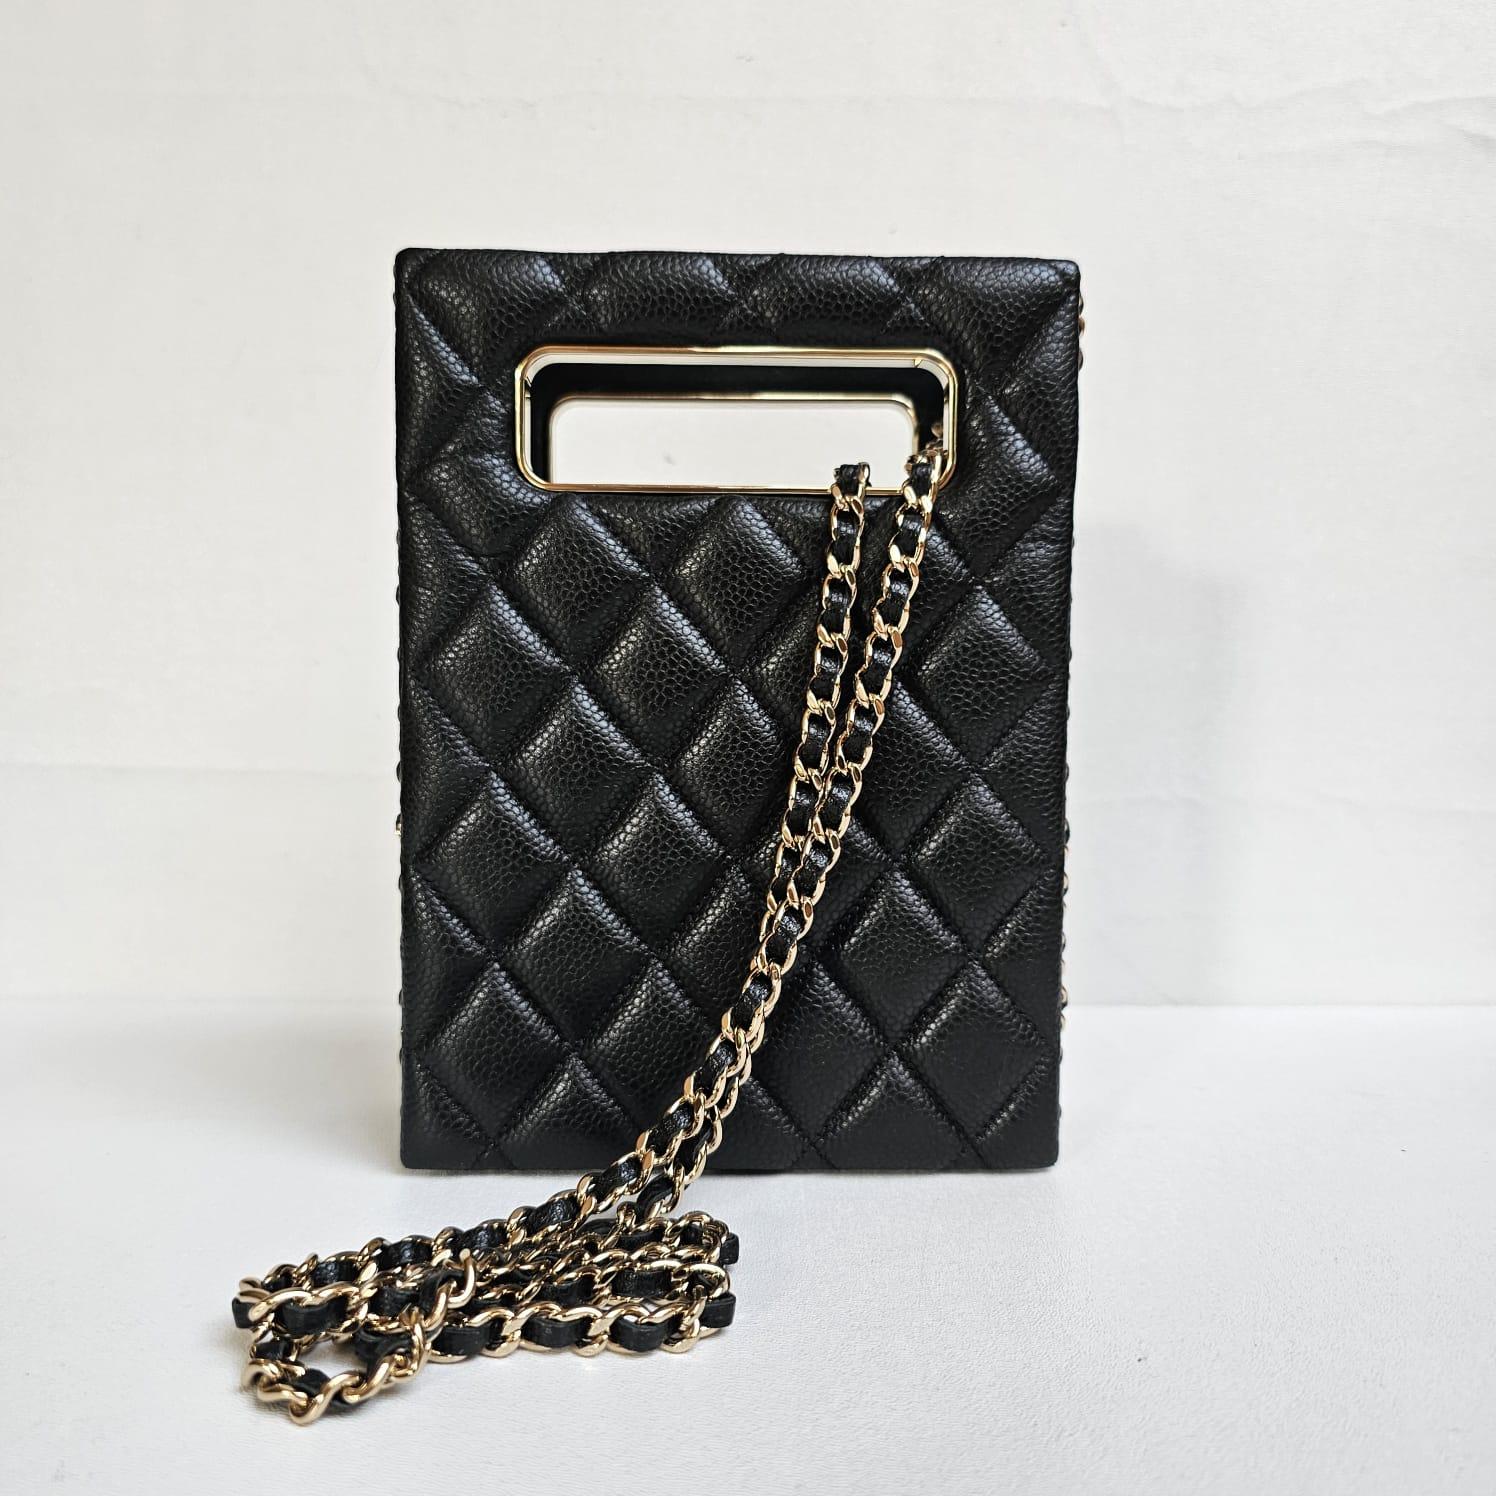 Chanel Black Caviar Quilted Evening Box Bag For Sale 6